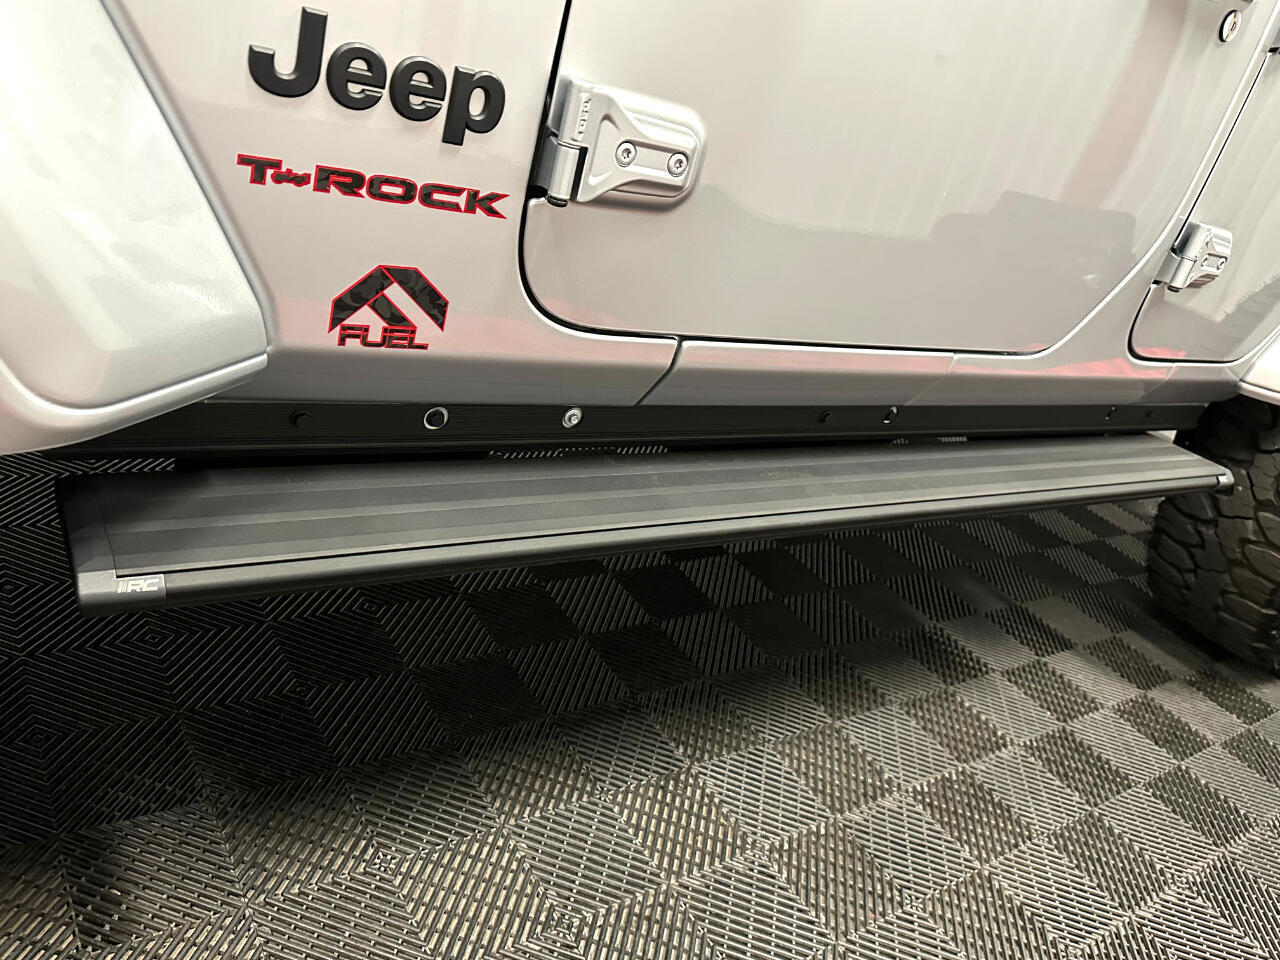 ::2023 Jeep Wrangler T-ROCK 1 Touch Sky Power Top Lifted 4x4